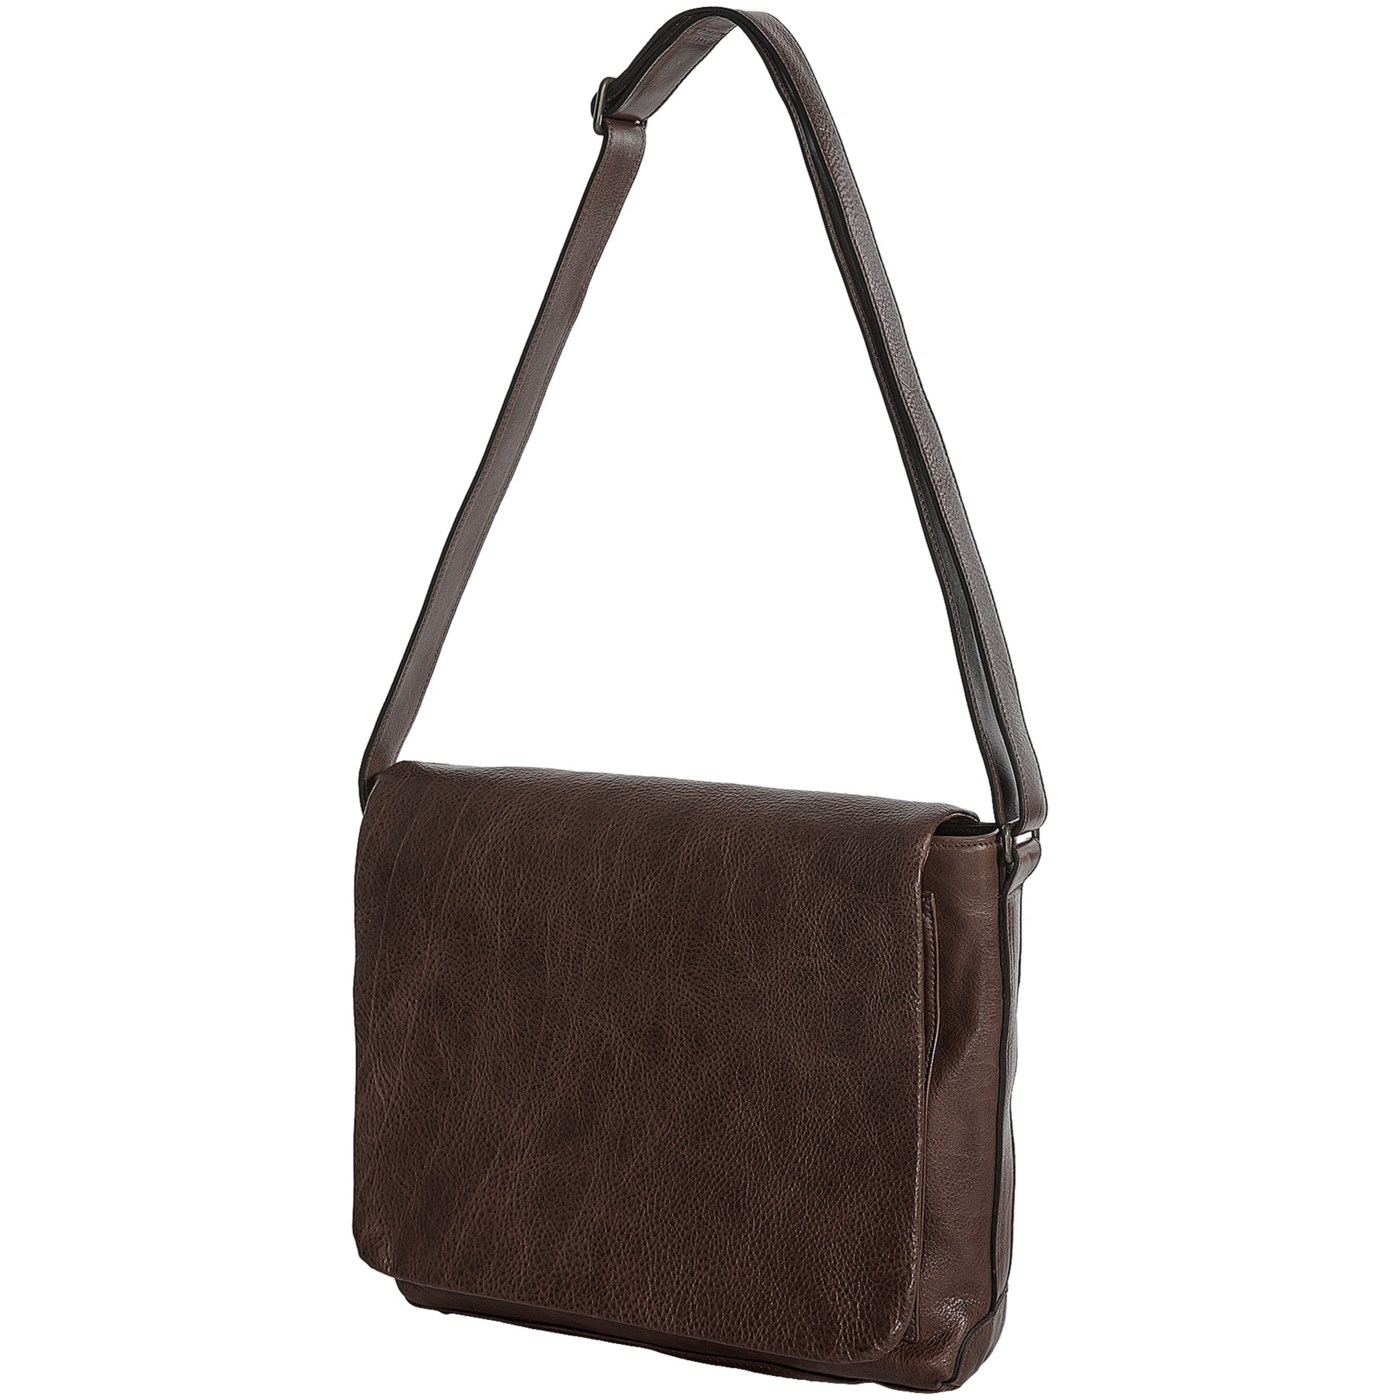 Moore & Giles Sackett Bag   Bison Leather 9231M 50